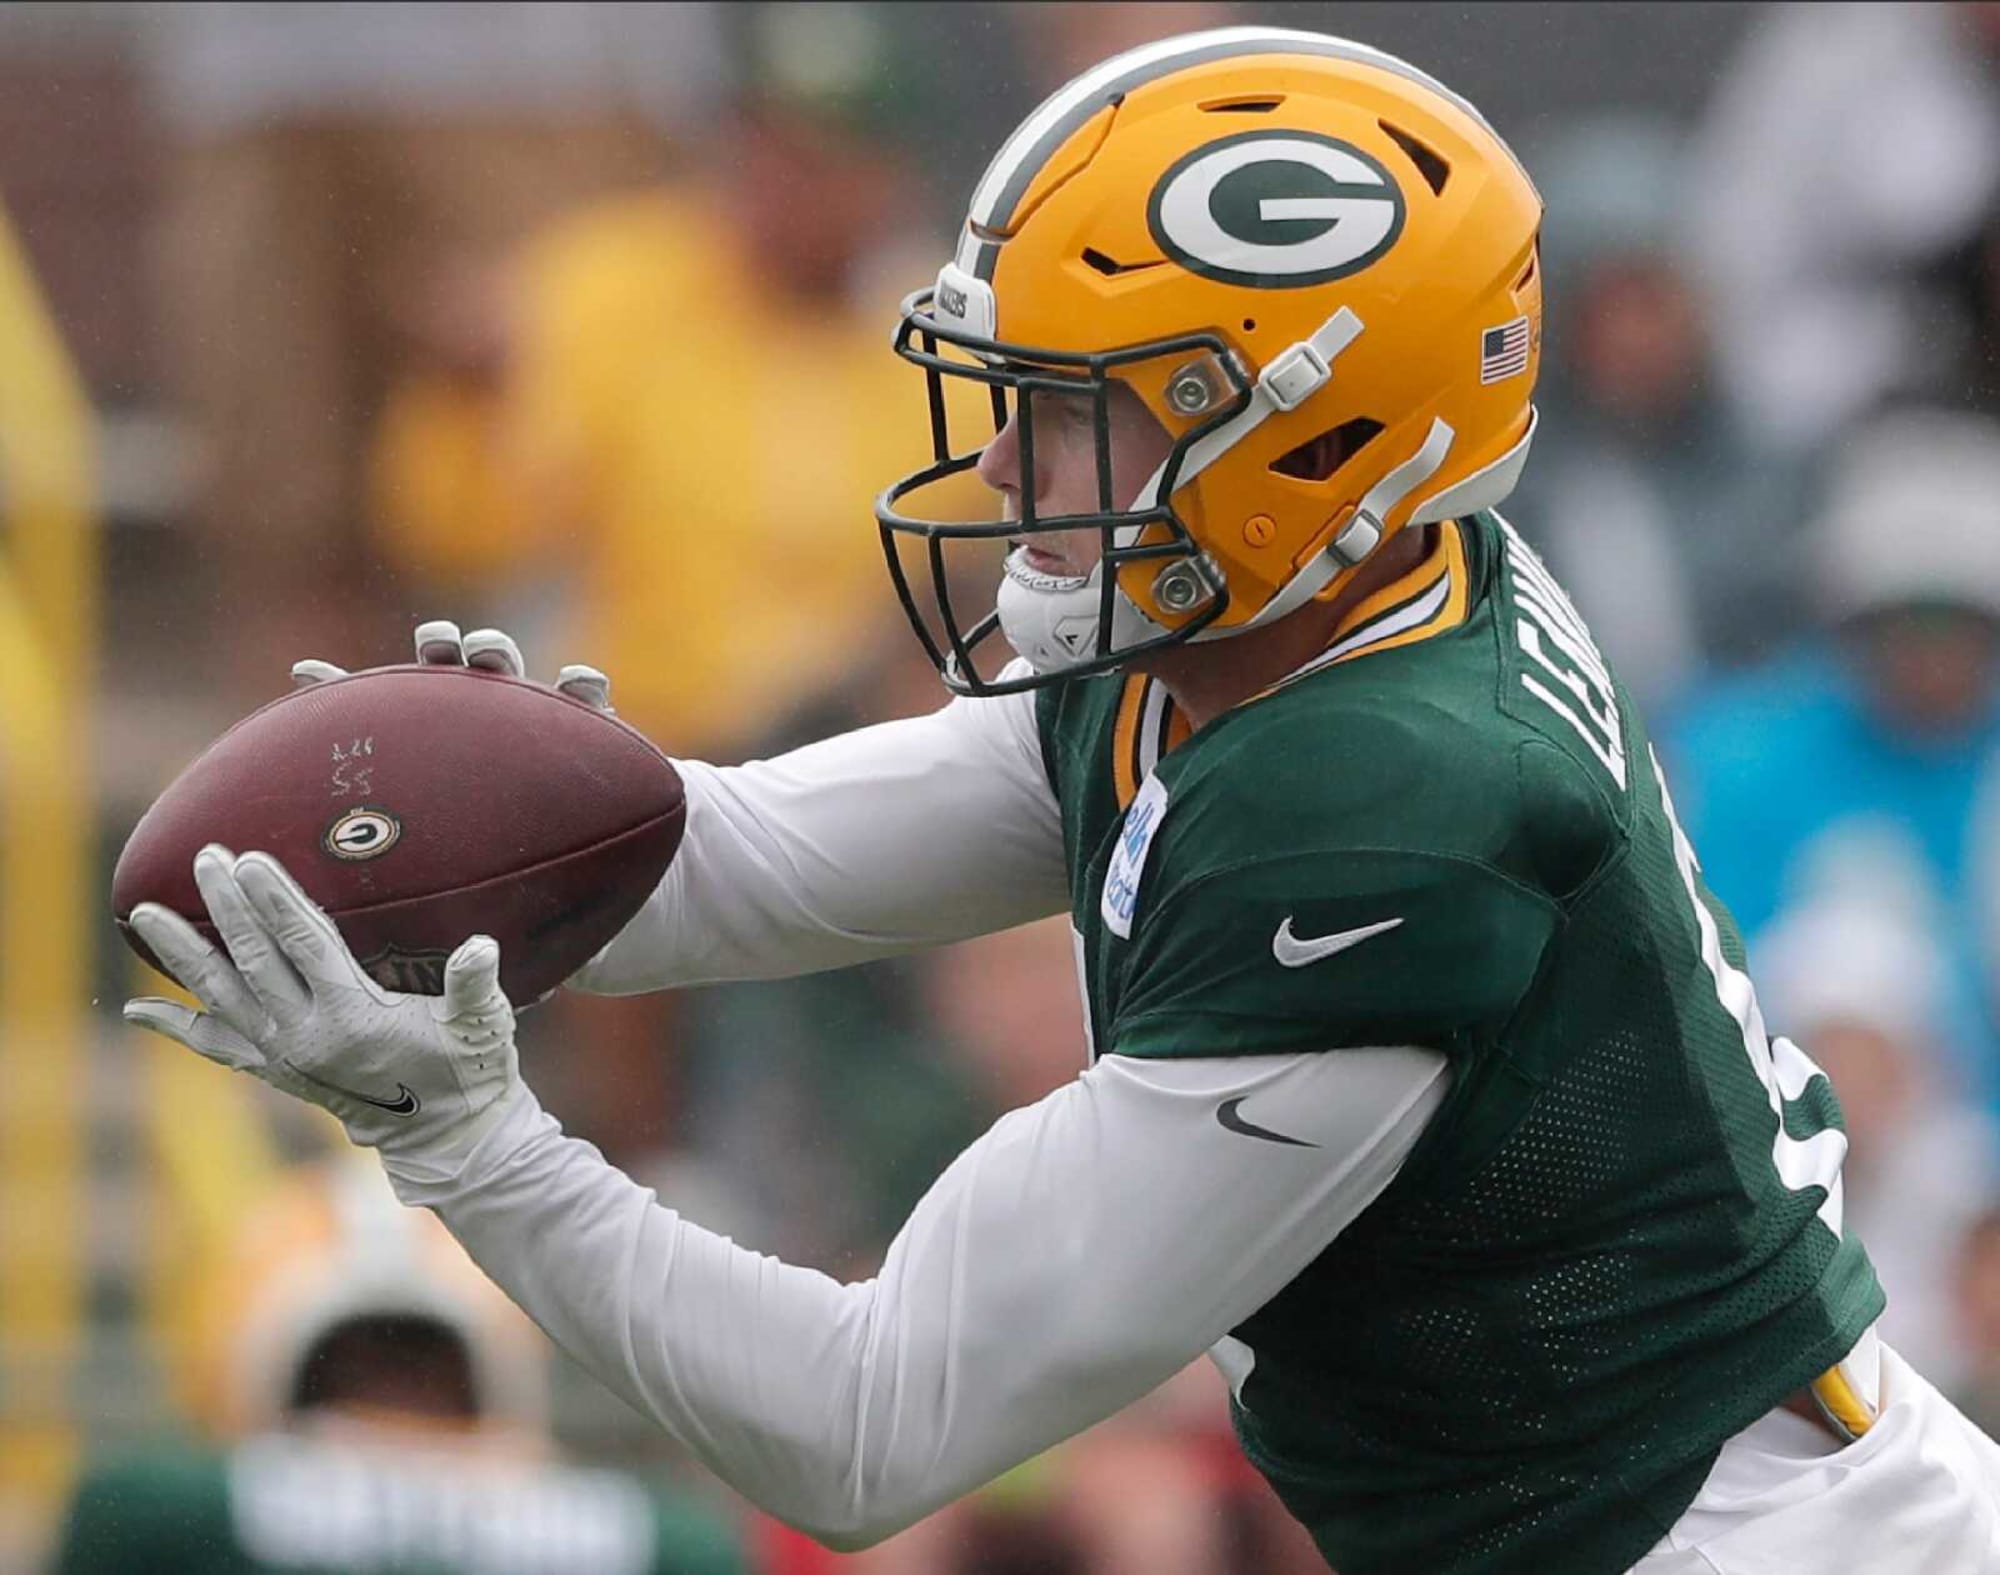 Dallin Leavitt unexpectedly returned to Packers practice on Sunday